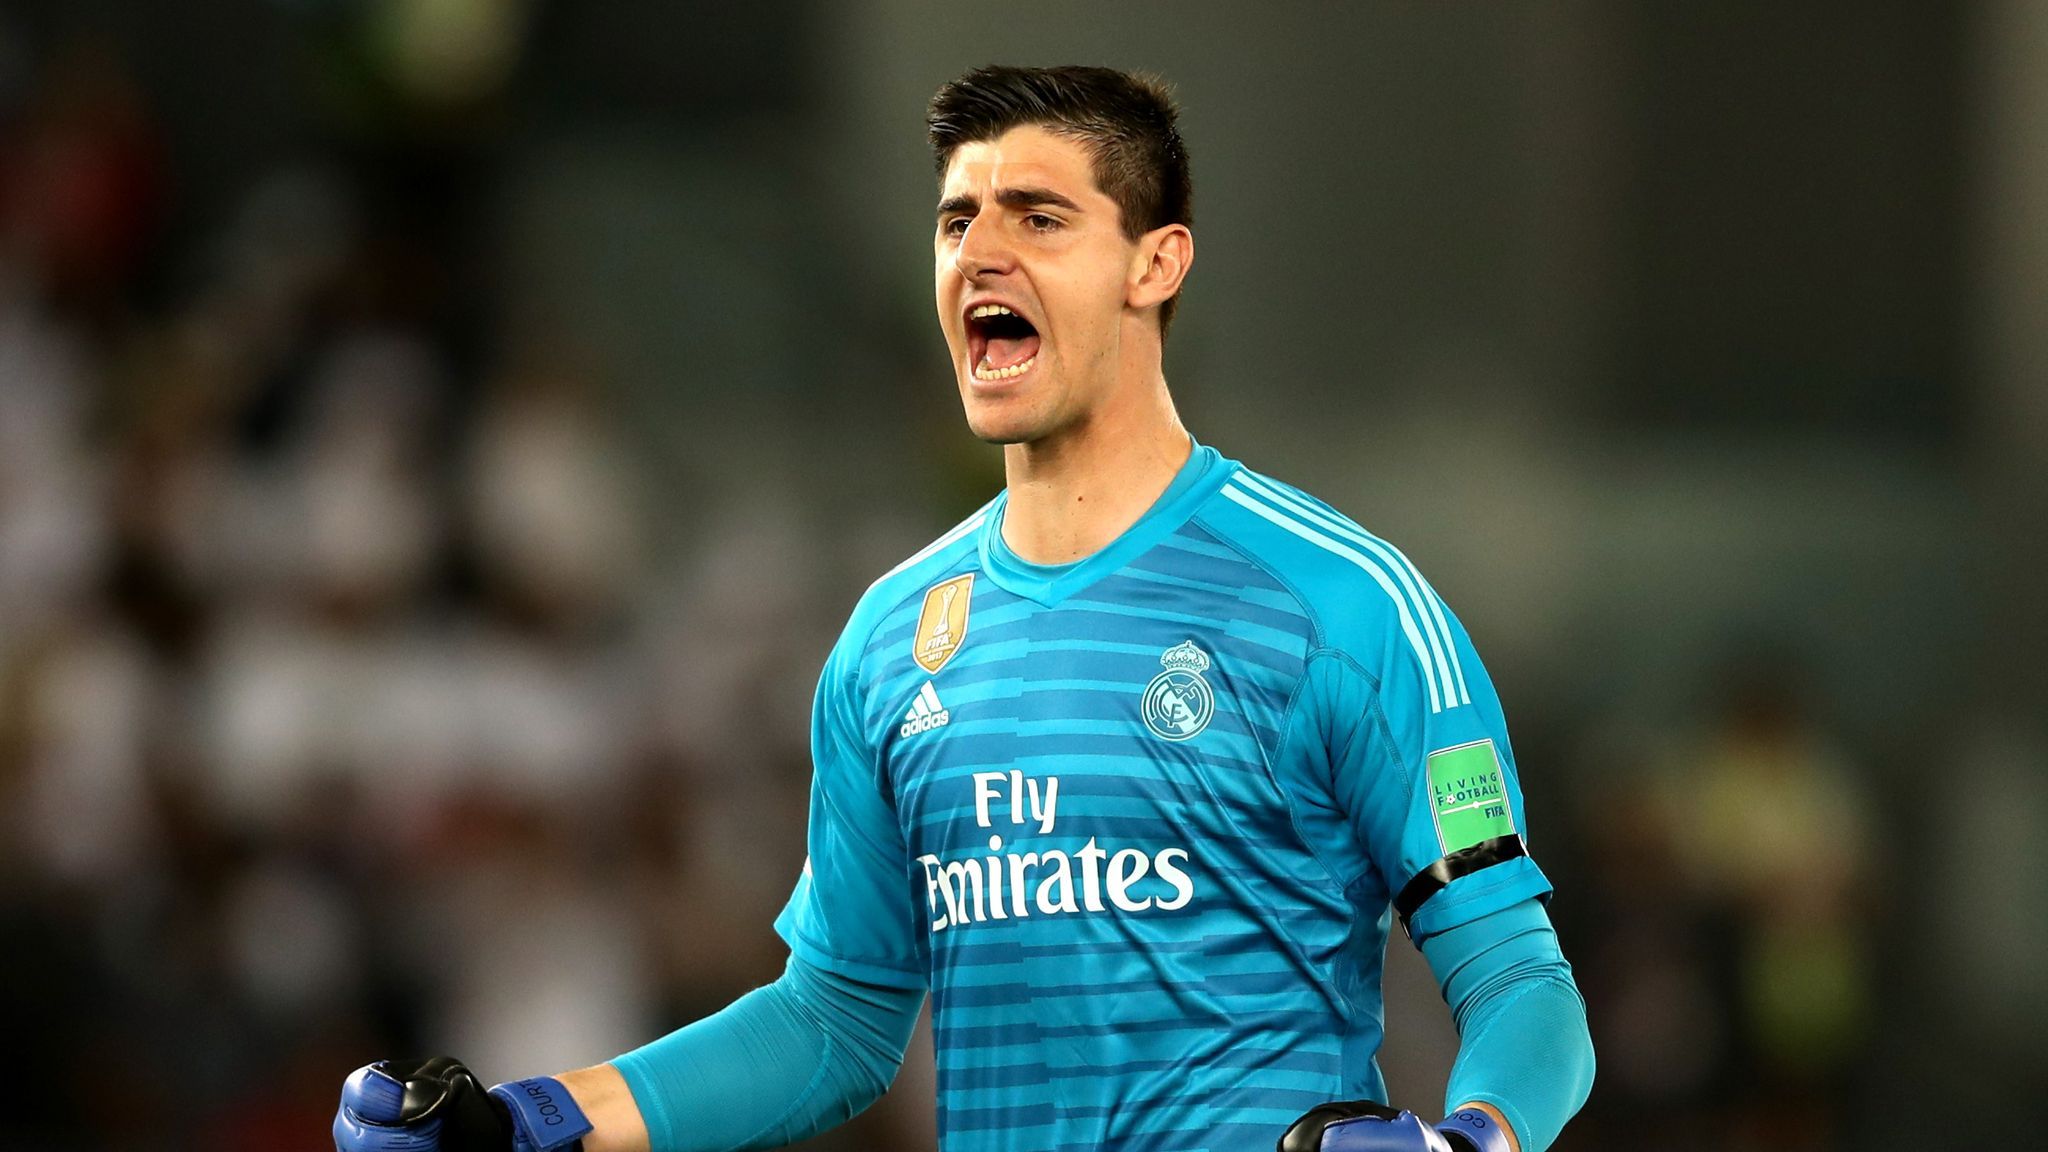 Thibaut Courtois: Real Madrid goalkeeper says he is among world's best